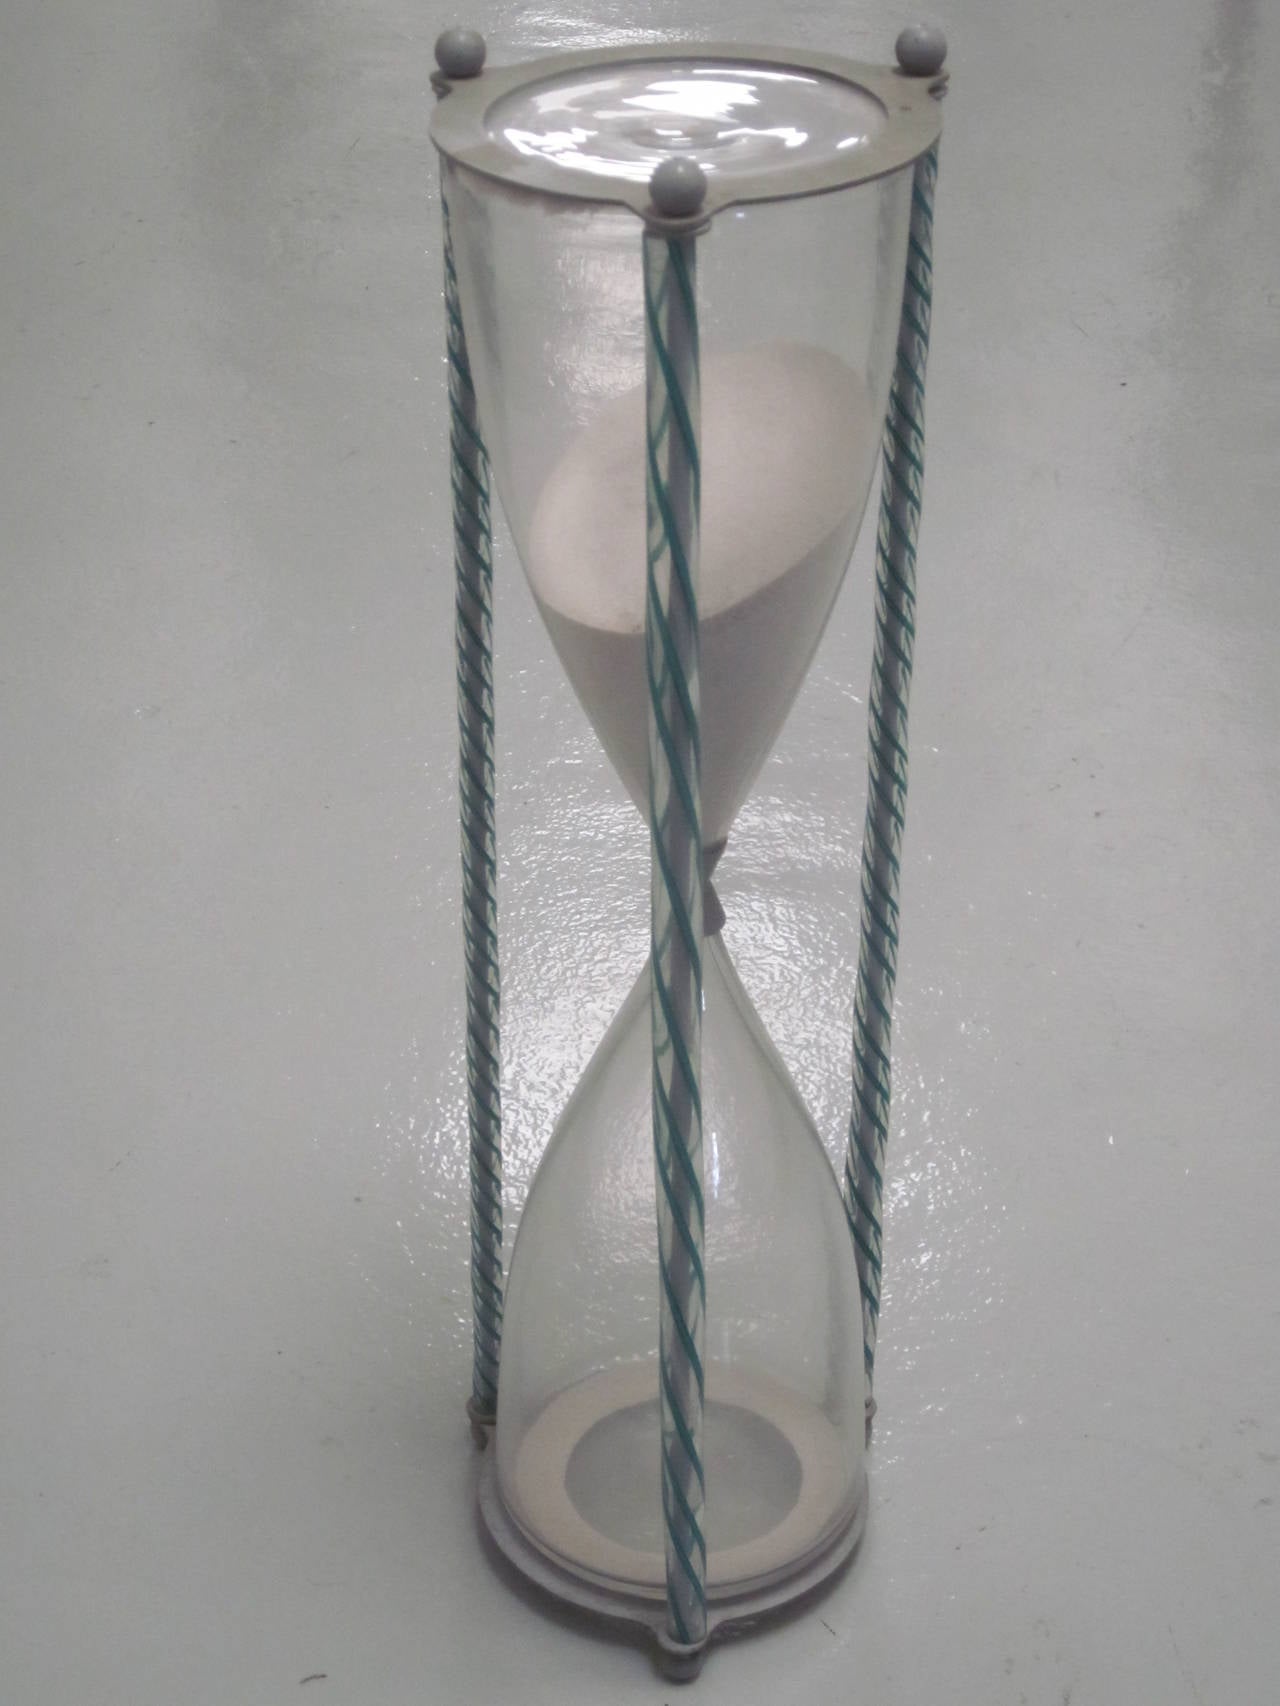 A large, rare Italian Mid-Century handblown hourglass designed by Paolo Venini, circa 1955 with three handblown glass zanfirico twists securing the hour glass to the metal frame. This wonderful Murano/Venetian glass object represents the elegant,